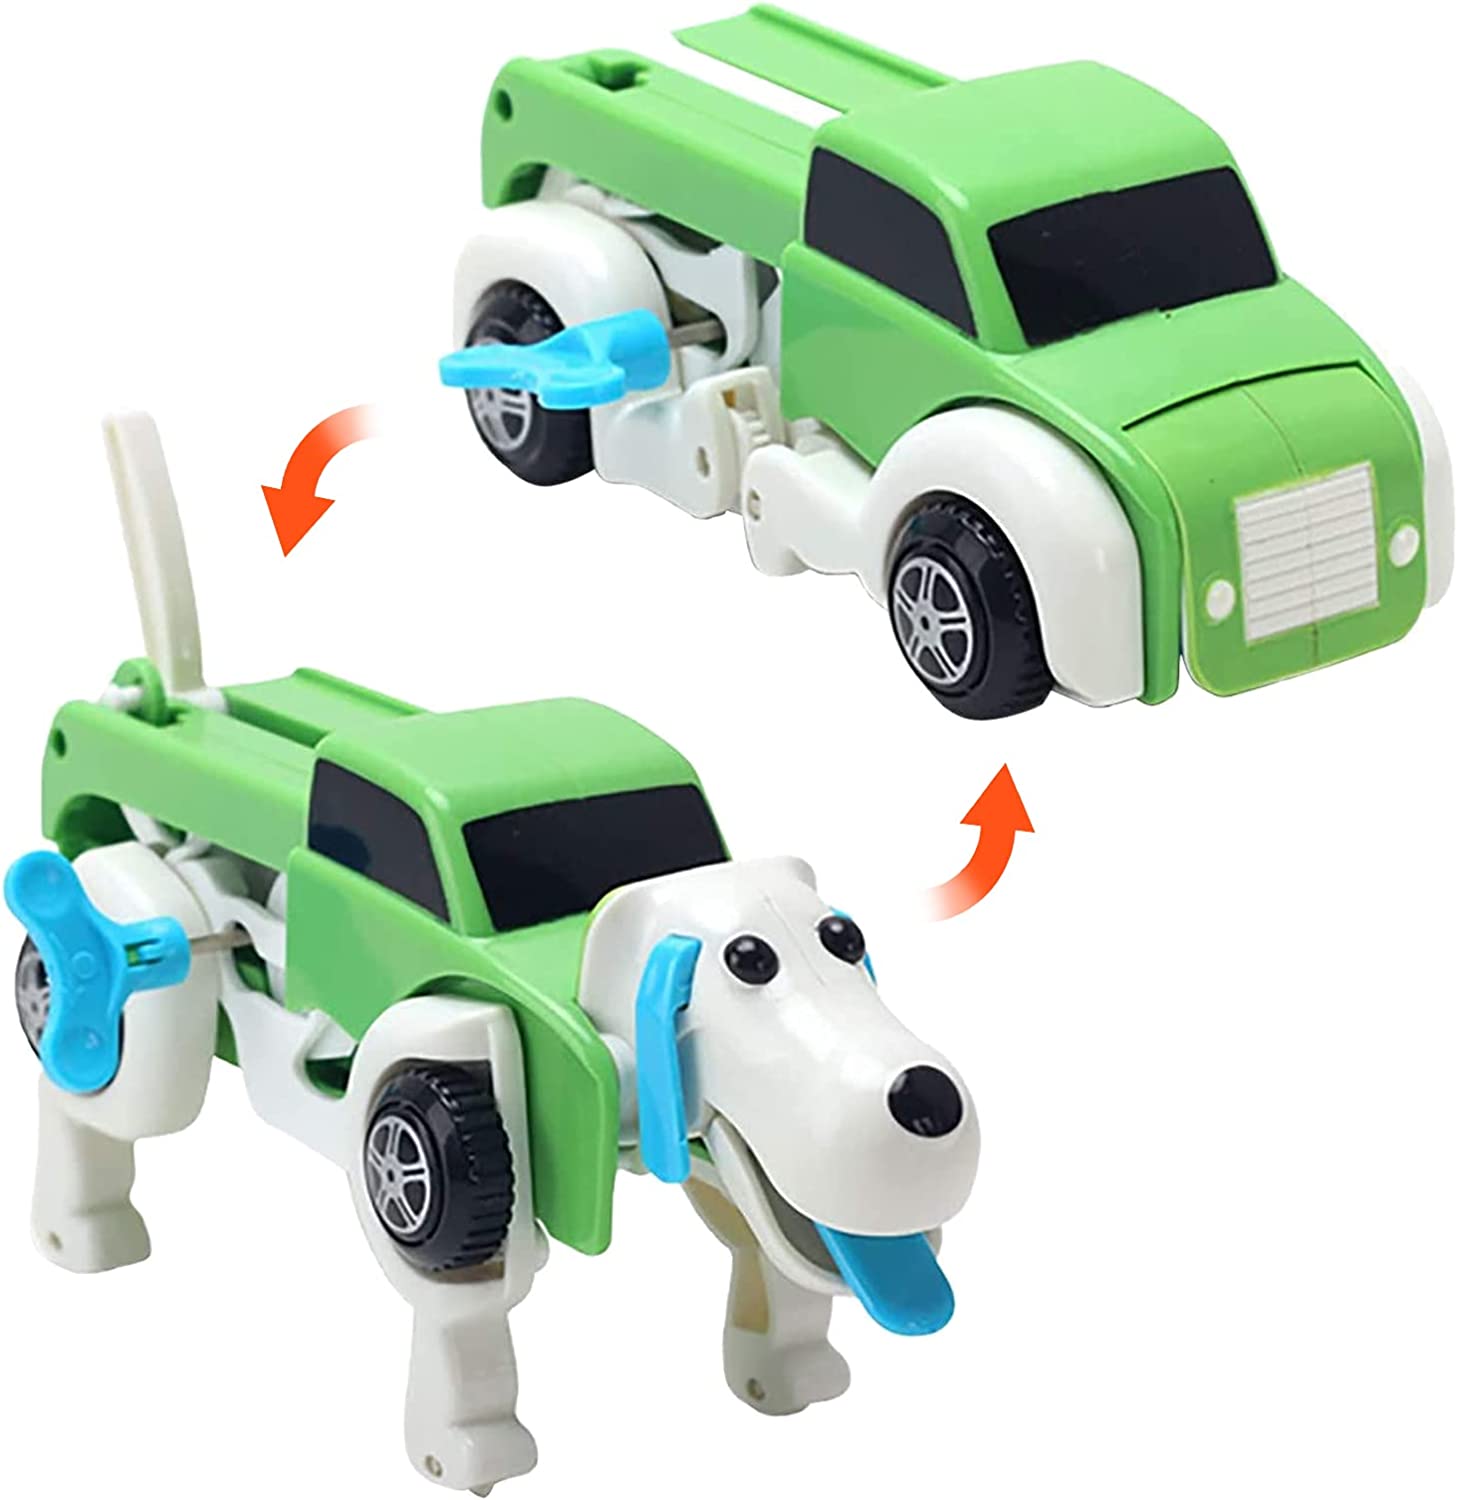 (🎄Christmas Hot Sale - 48% OFF) Automatic Deformed Toddler Car Toy, BUY 2 FREE SHIPPING